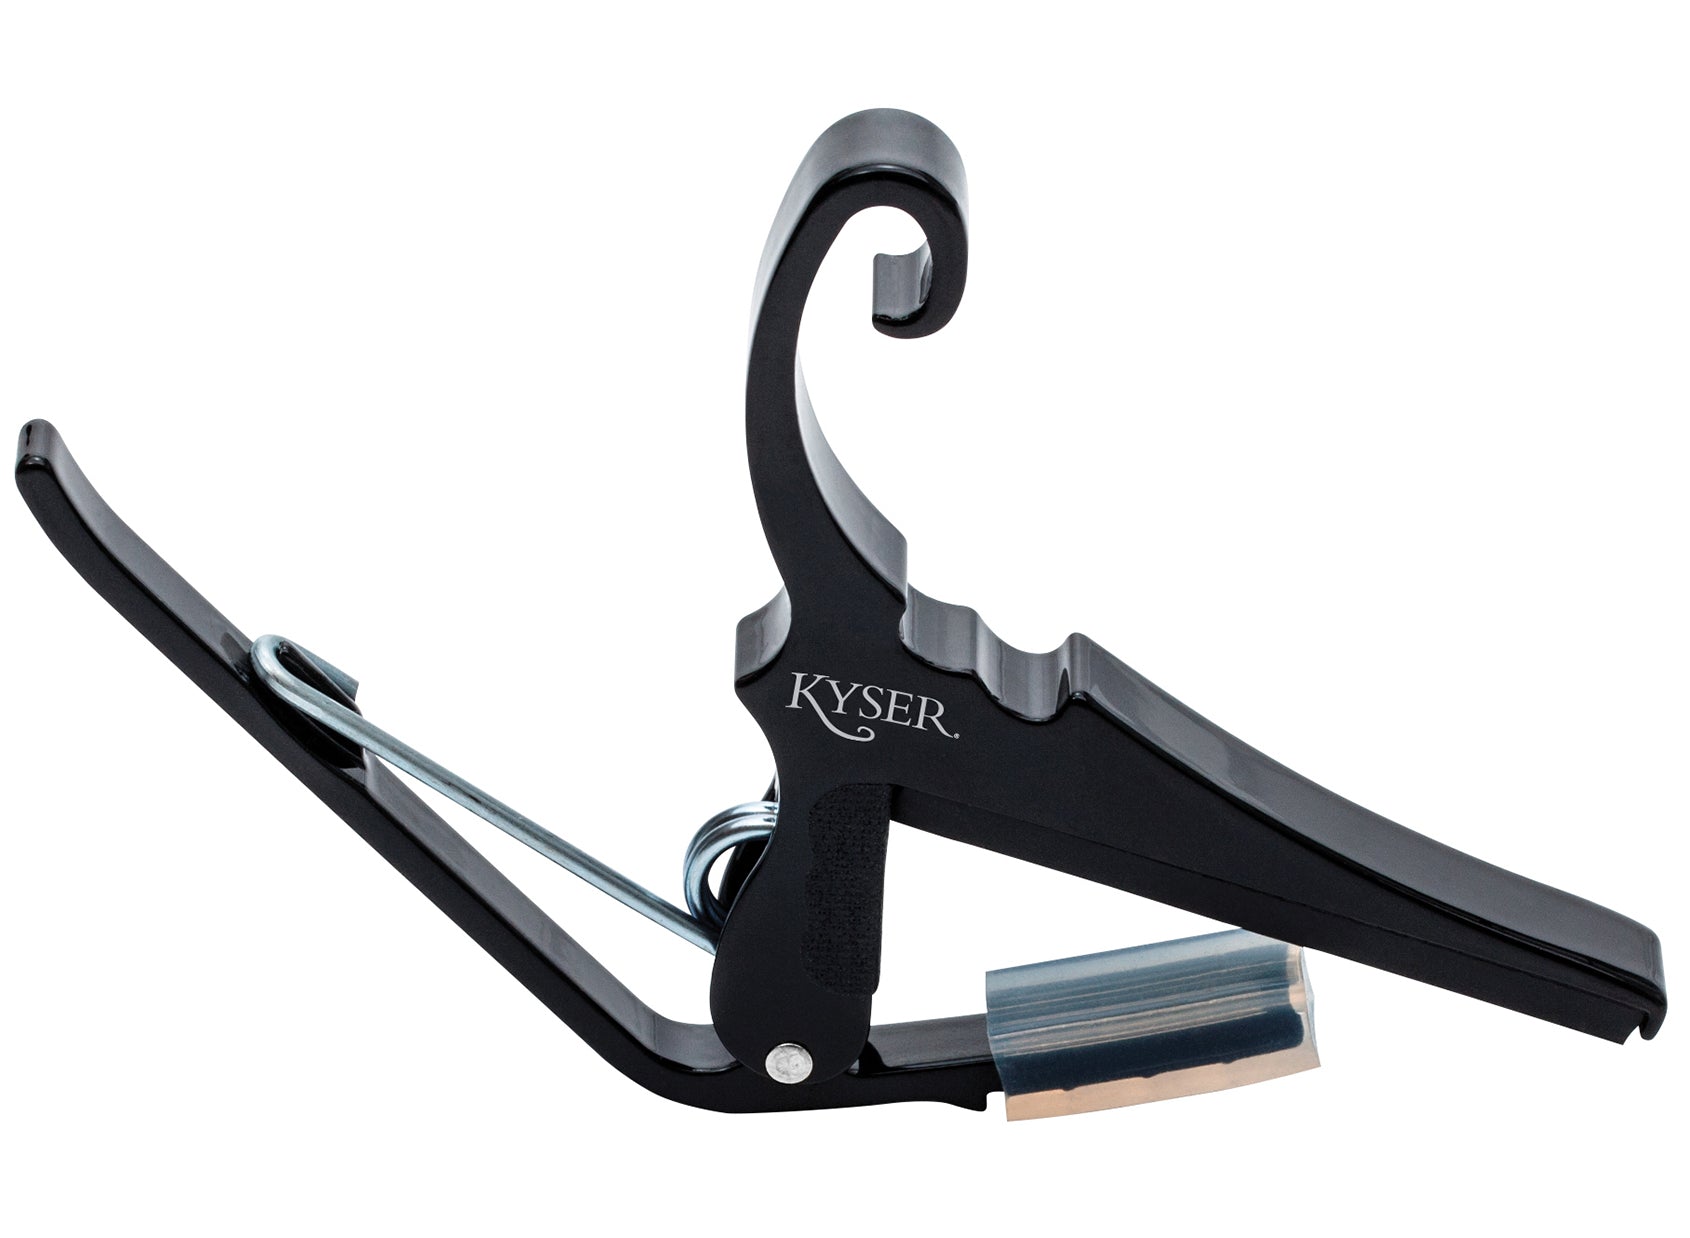 Black Capo for classical guitars. Easy headstock park and one hand reposition.